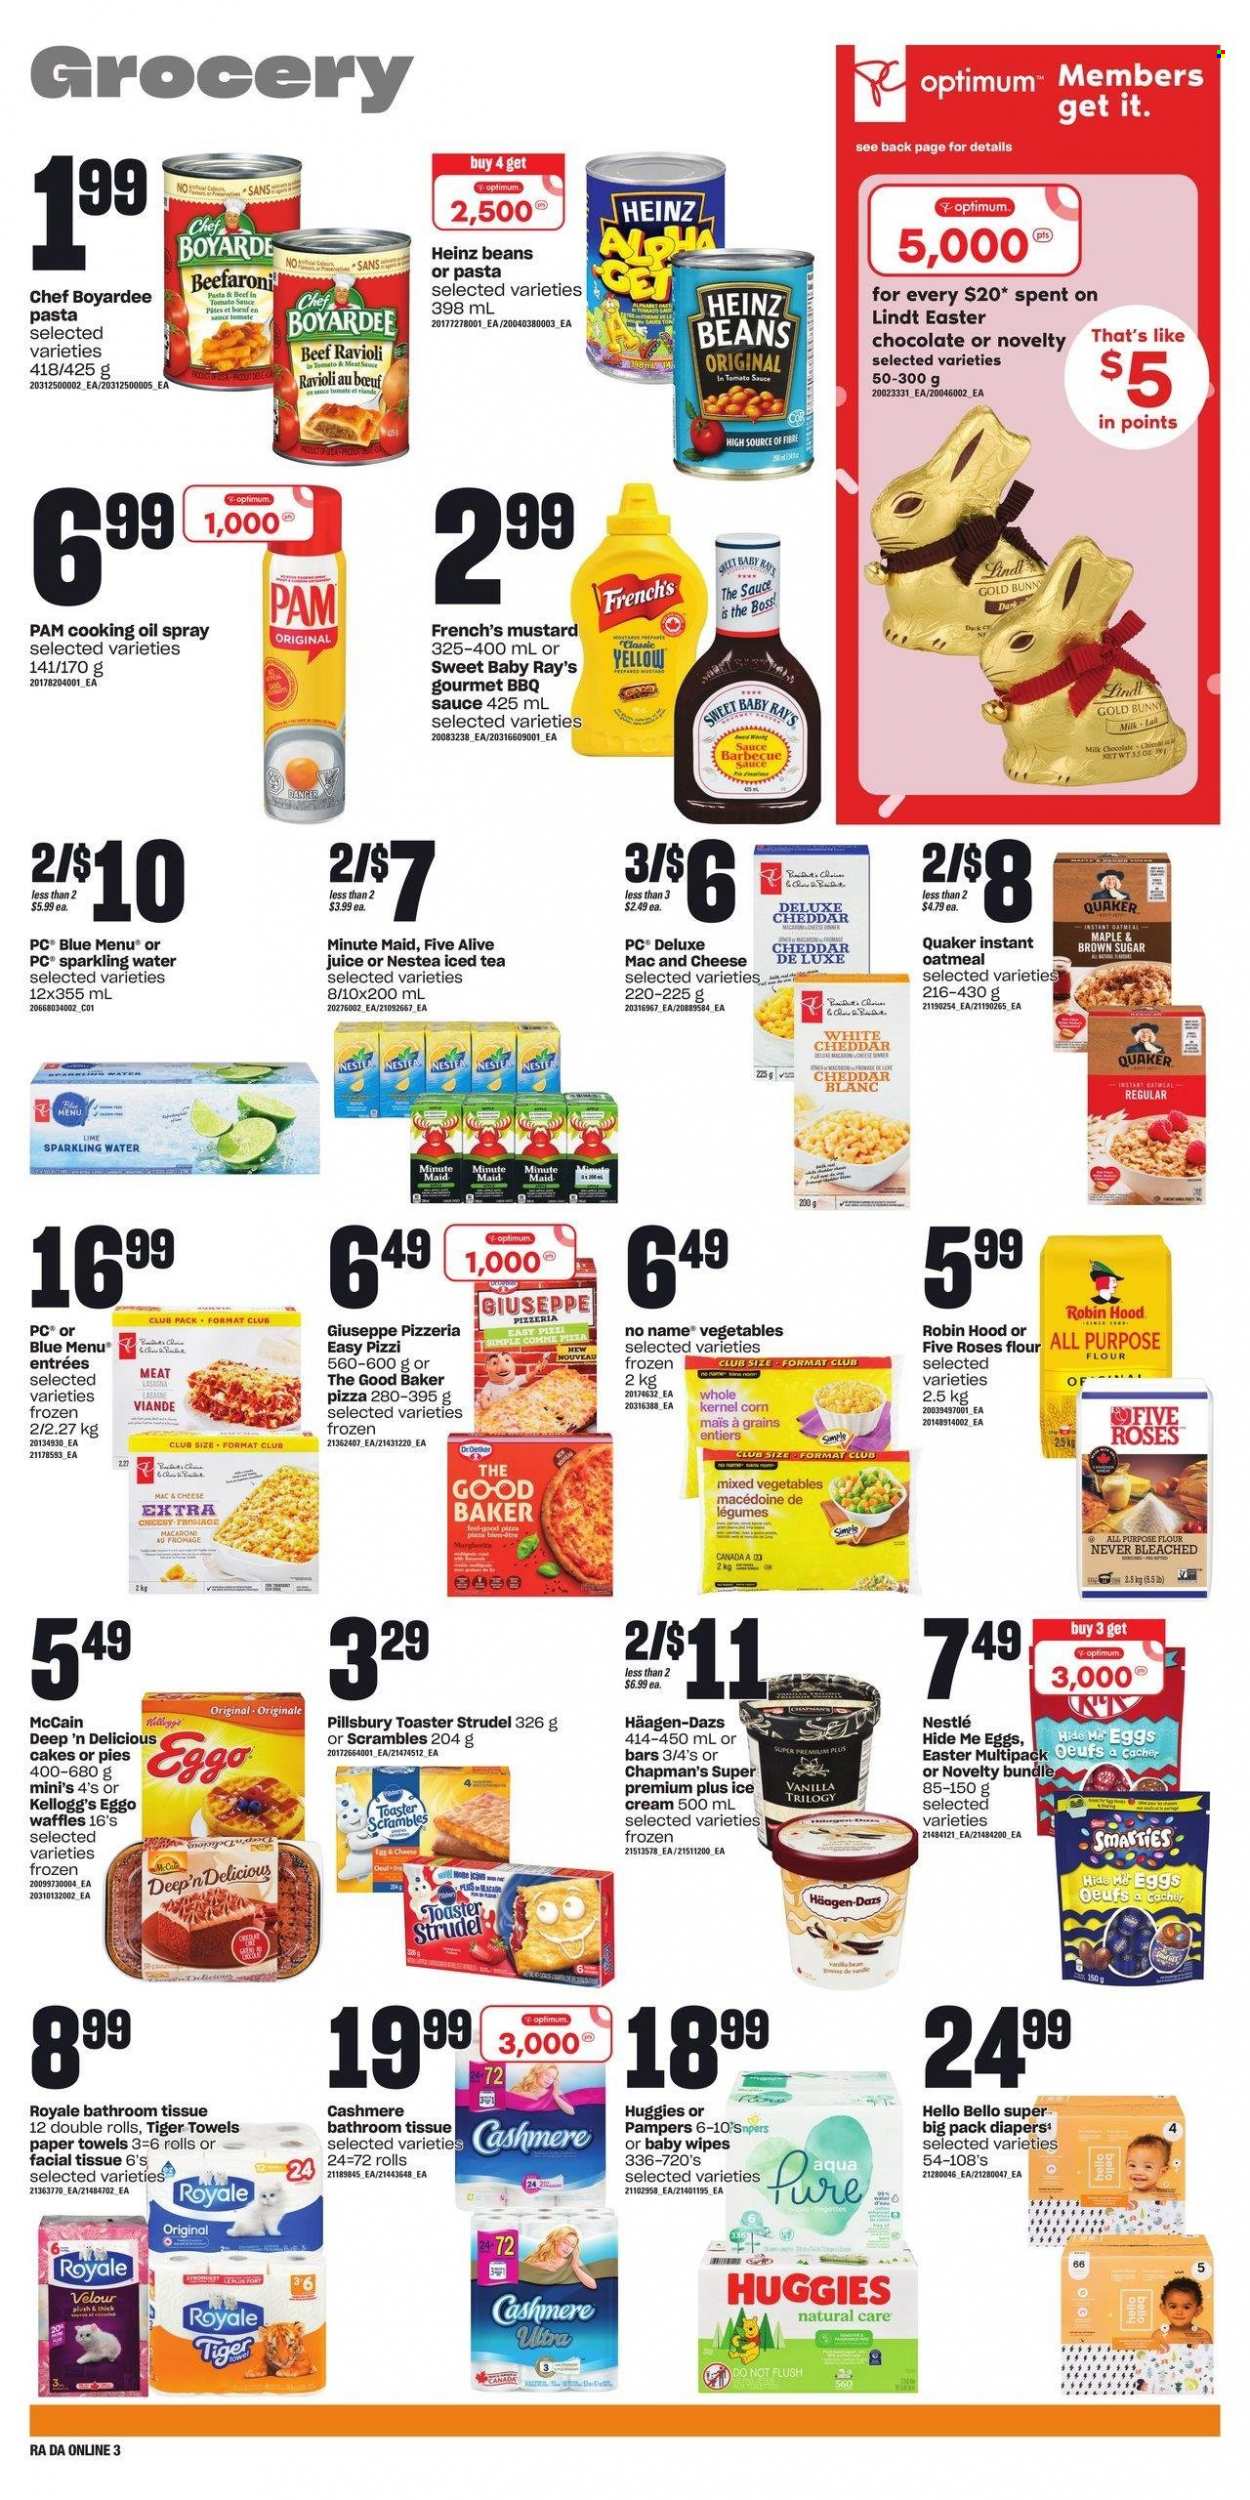 thumbnail - Atlantic Superstore Flyer - March 16, 2023 - March 22, 2023 - Sales products - cake, strudel, waffles, beans, corn, No Name, ravioli, pizza, Pillsbury, Quaker, cheddar, eggs, ice cream, Häagen-Dazs, mixed vegetables, McCain, milk chocolate, Kellogg's, all purpose flour, cane sugar, flour, oatmeal, Chef Boyardee, BBQ sauce, mustard, oil, cooking oil, juice, ice tea, fruit punch, sparkling water, water, wipes, Pampers, baby wipes, nappies, bath tissue, kitchen towels, paper towels, Optimum, Nestlé, Heinz, Huggies, Lindt, Smarties. Page 7.